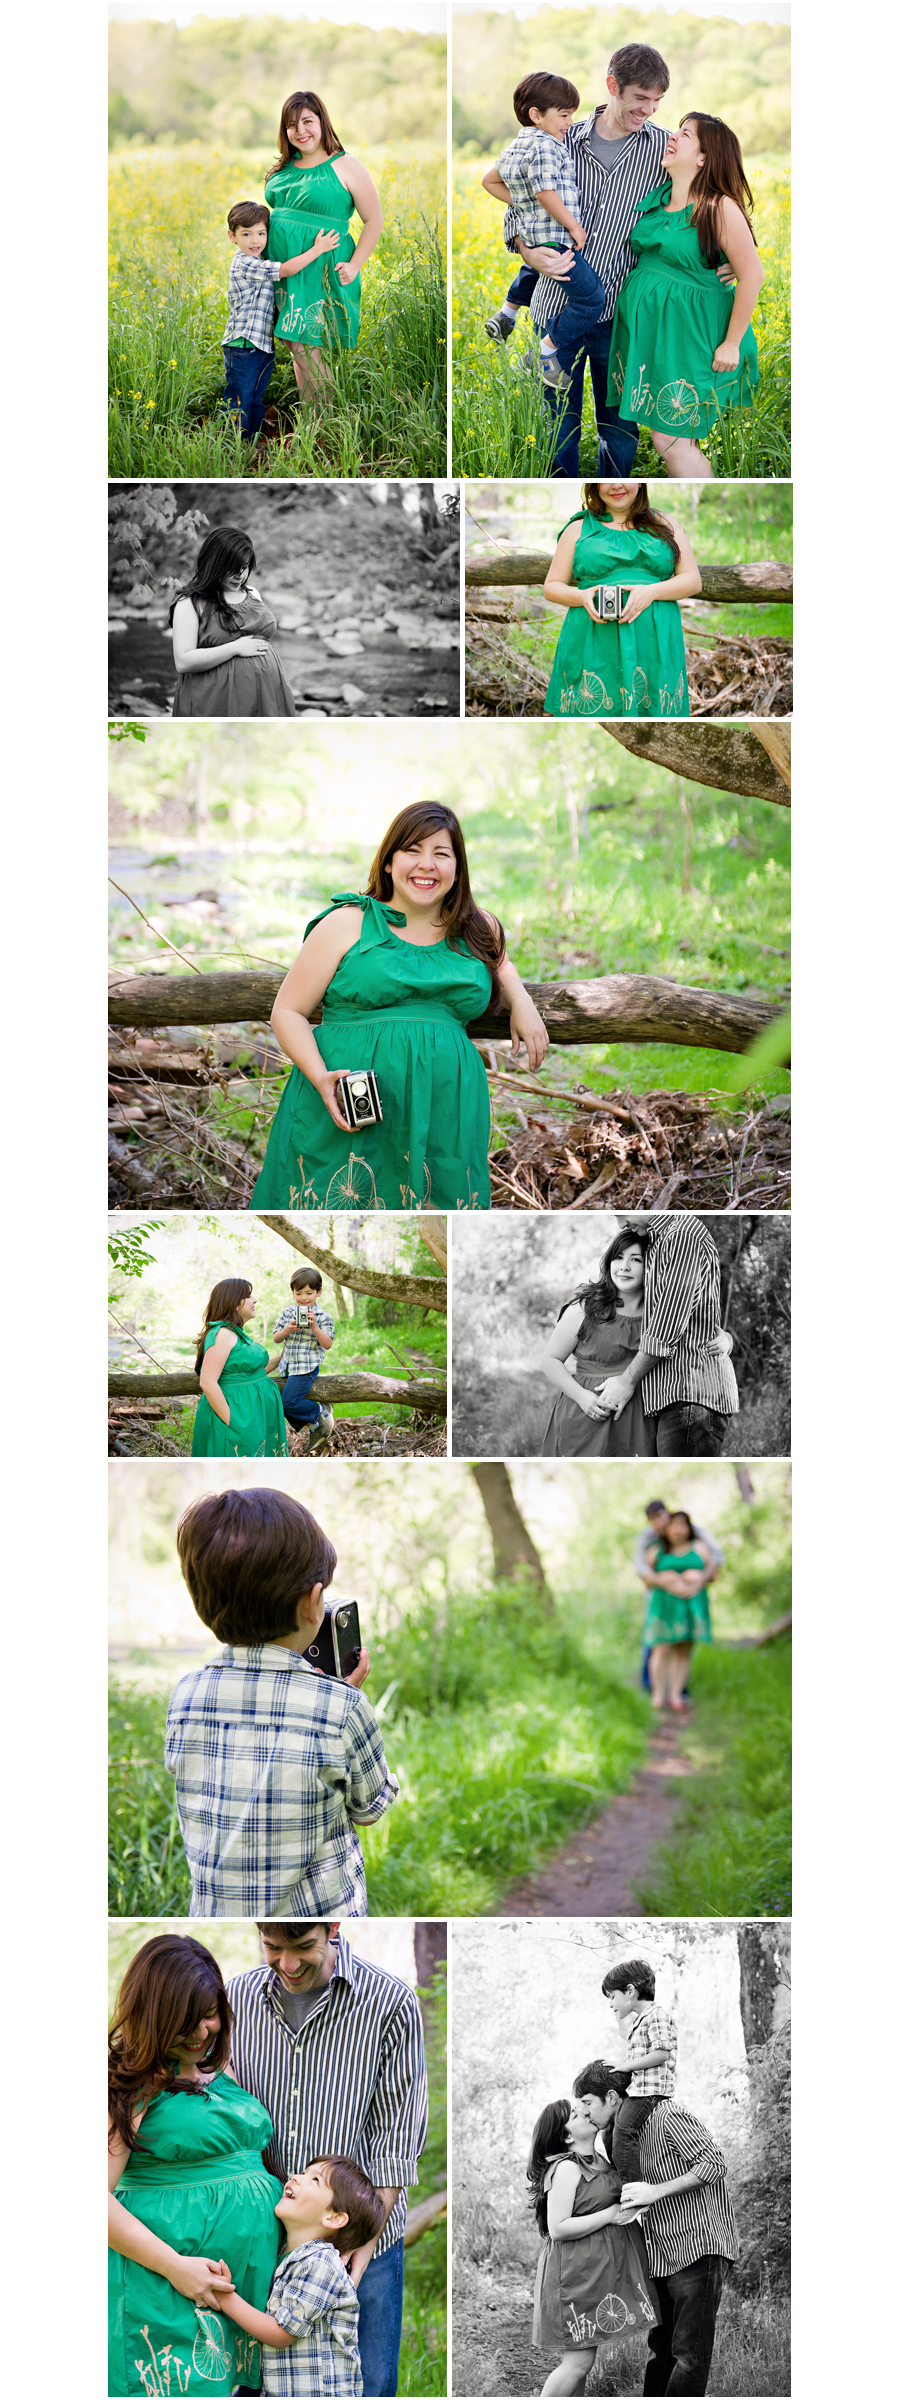 On-location maternity photography with sibling. Maternity photography in a park maternity photography near water. Norristown Farm Park